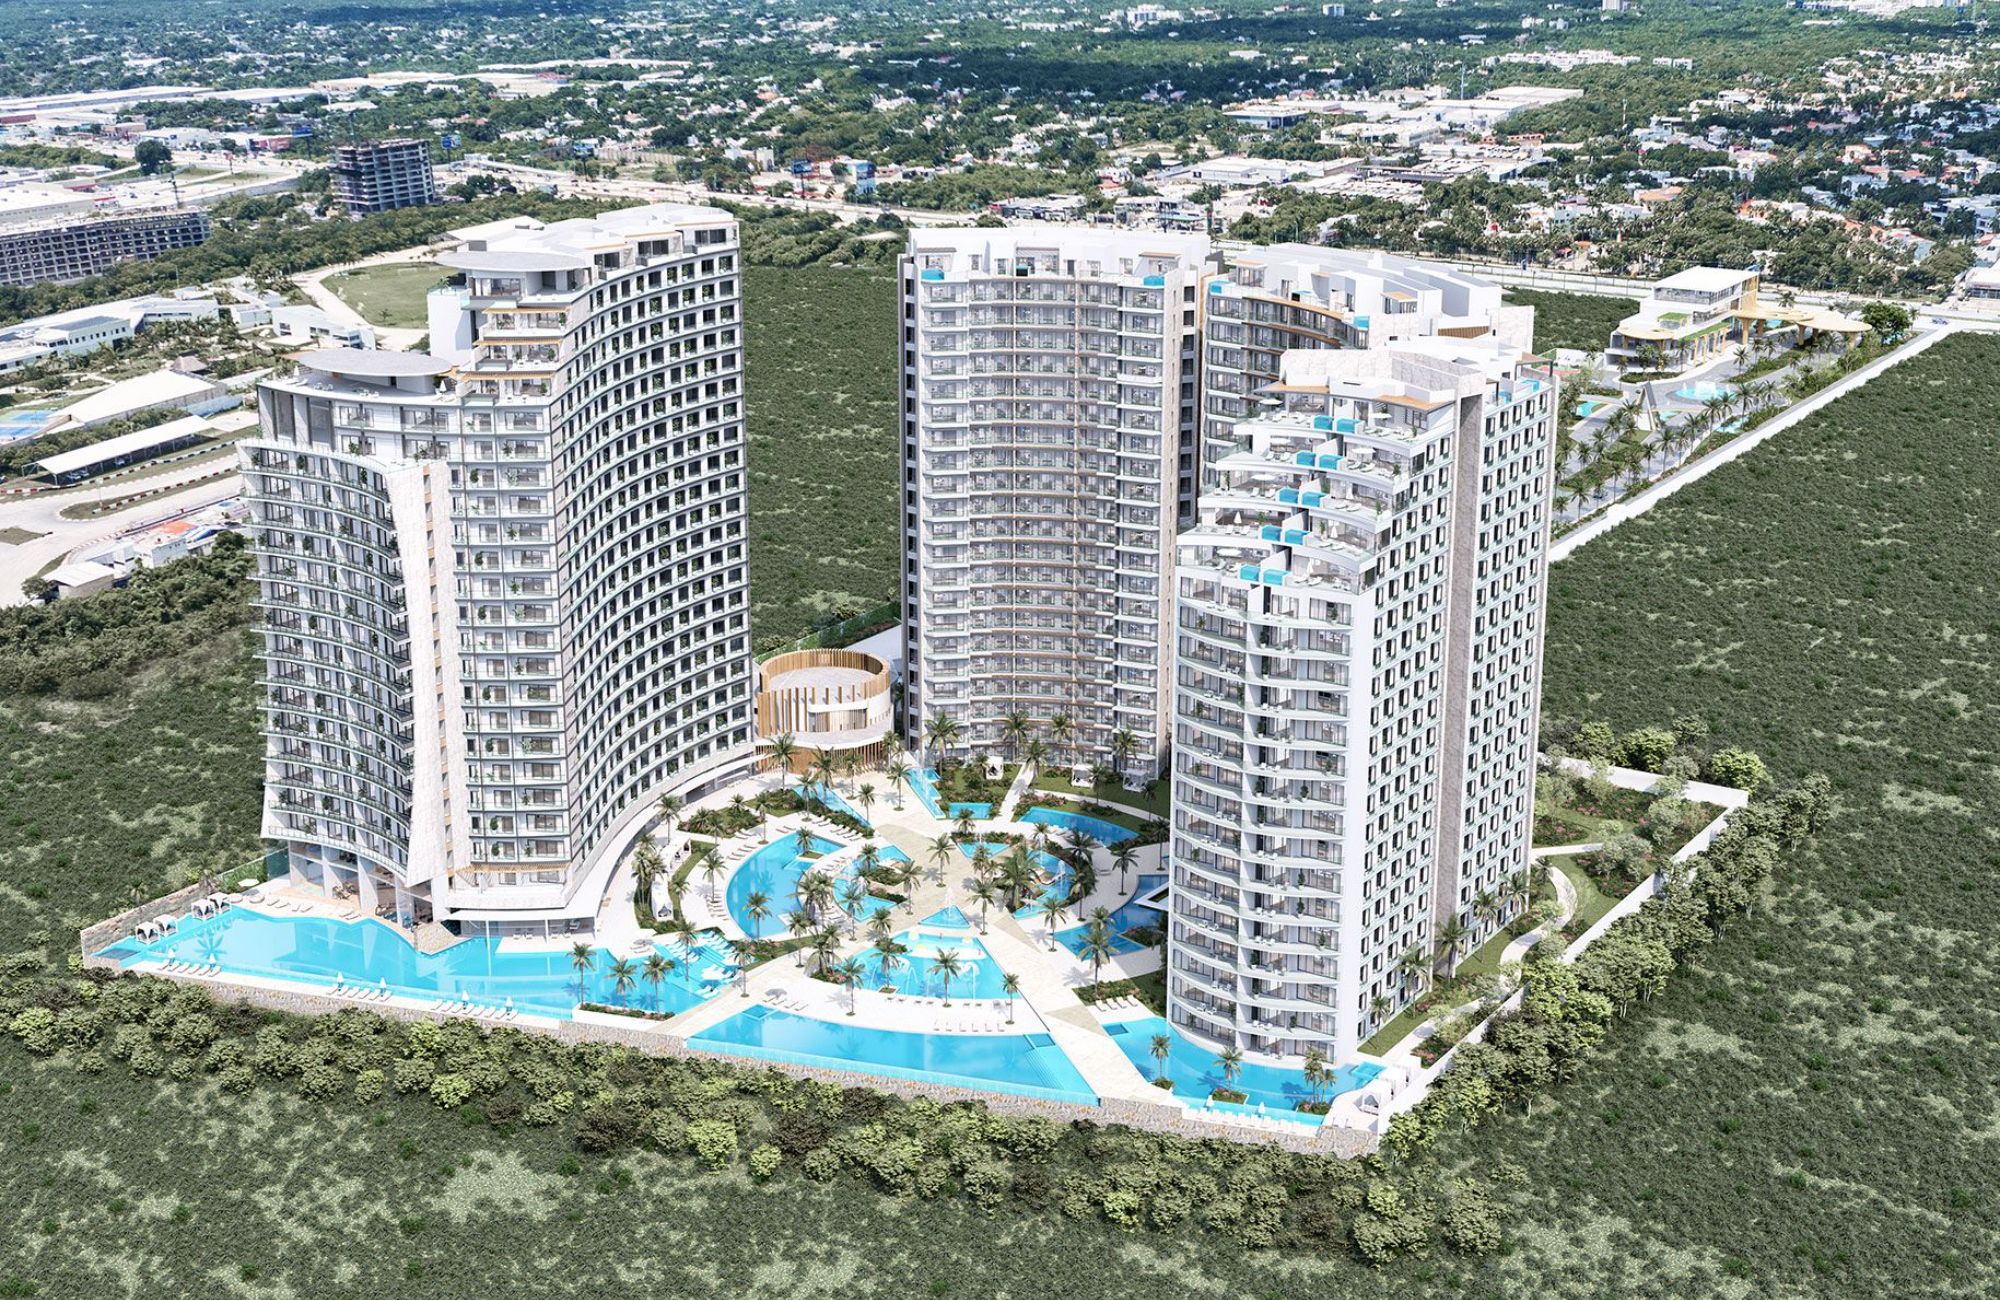 Condominium with pool, Co-work Space and Jacuzzi, pre-construction, for sale, Cancún.